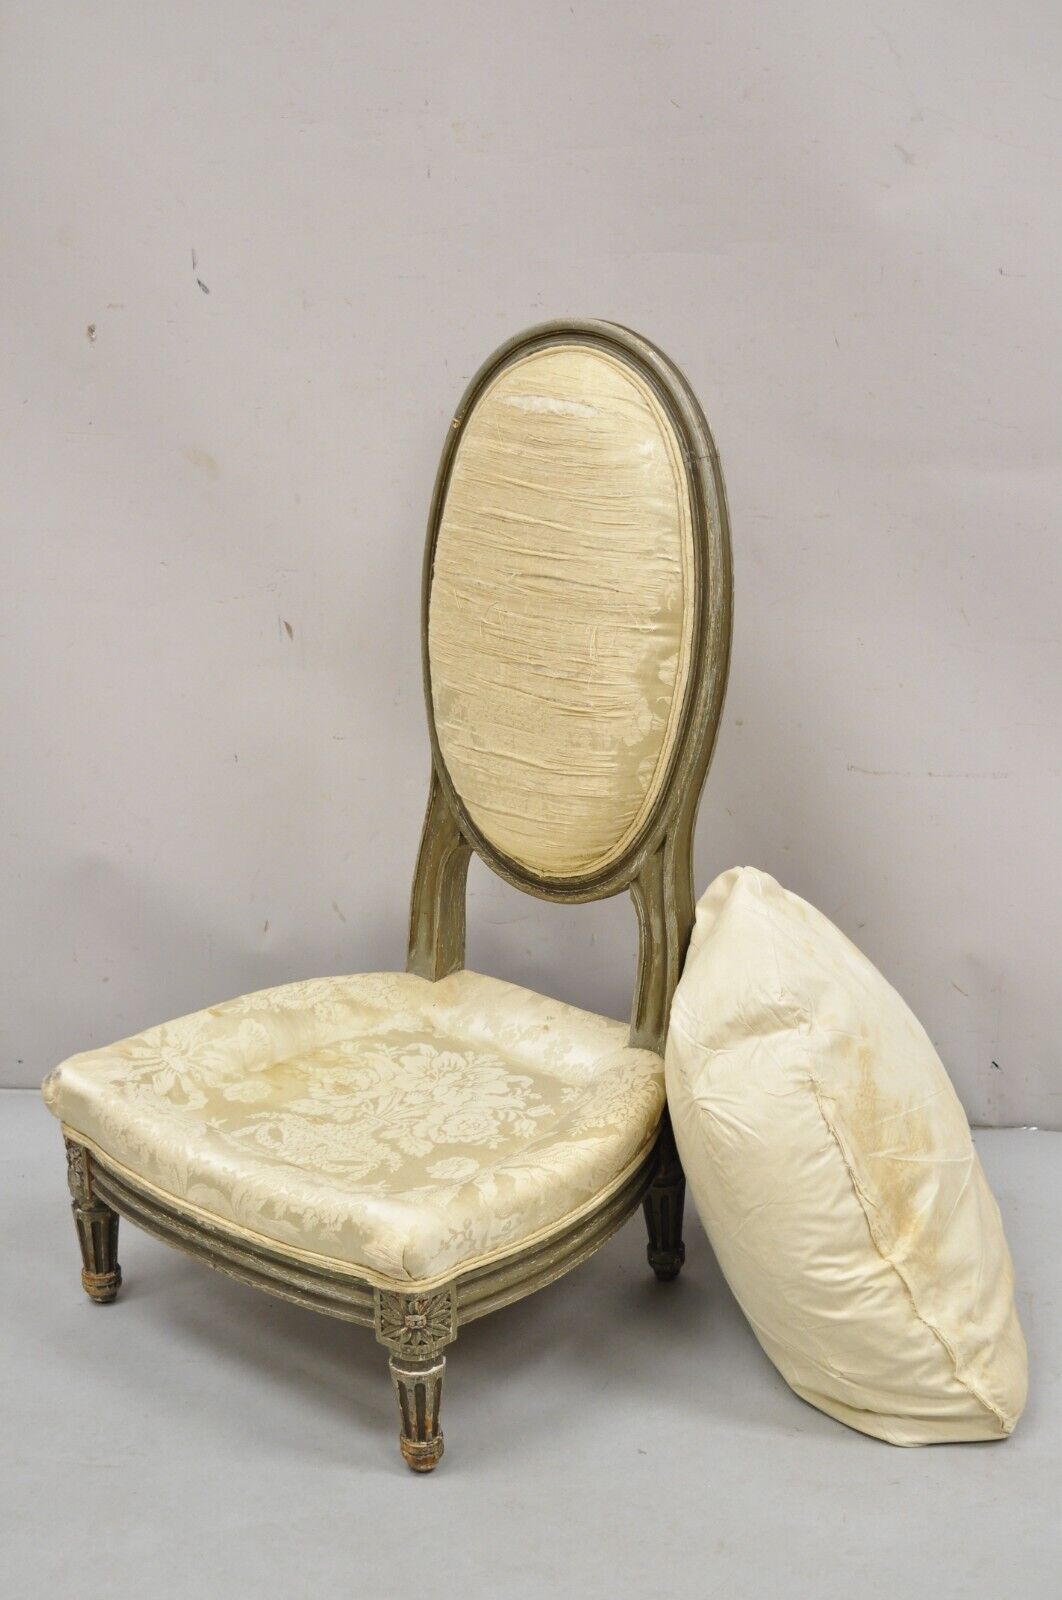 Antique French Louis XVI Style Distress Painted Boudoir Slipper Low Chair